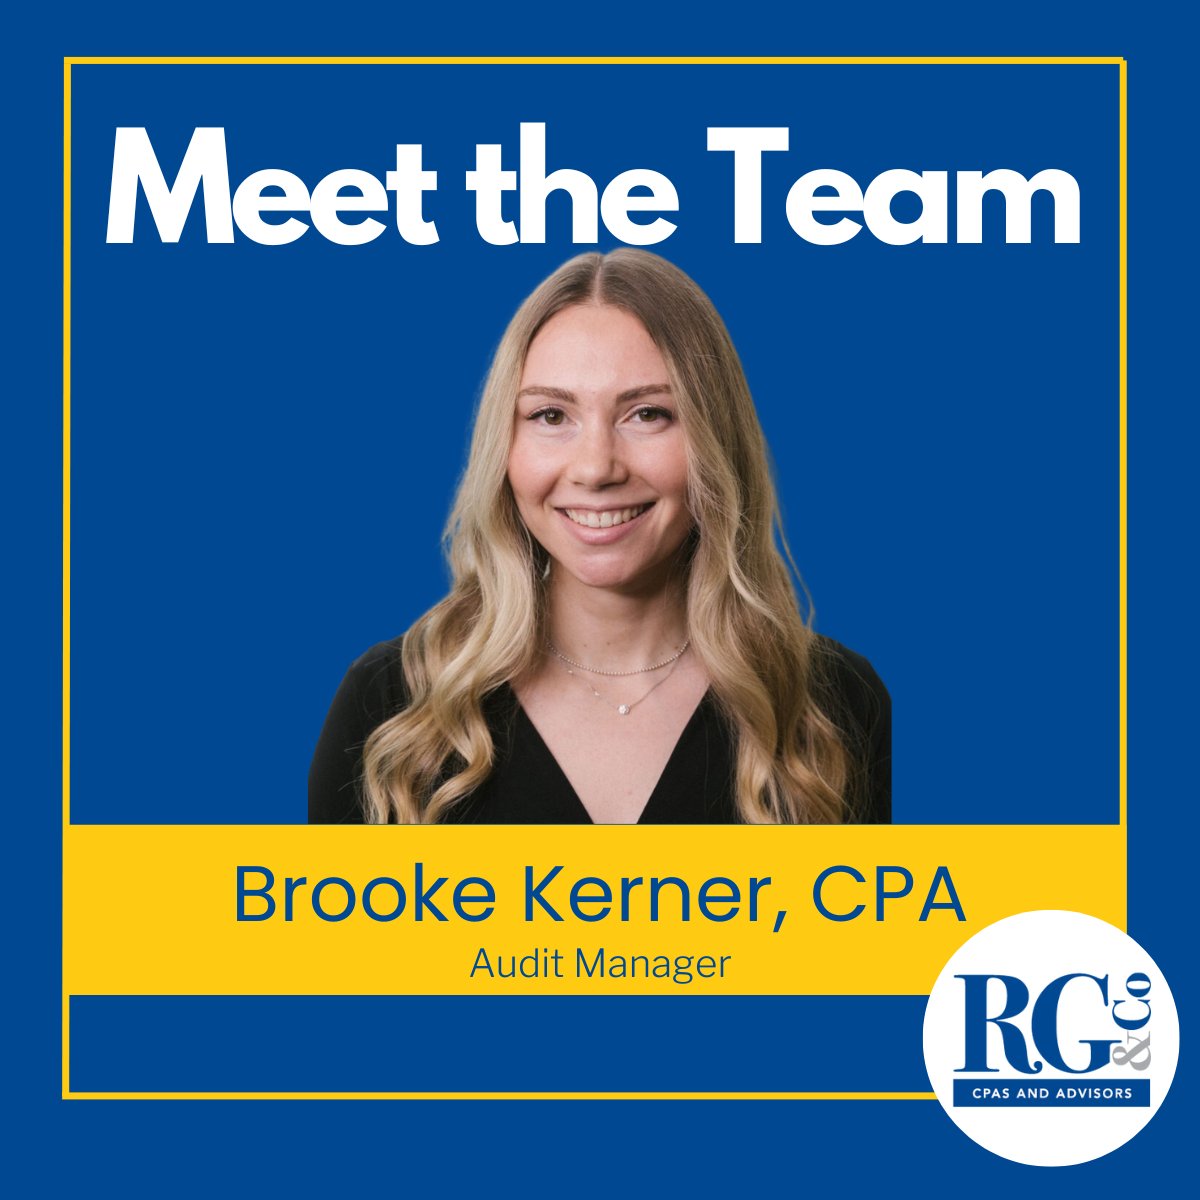 Meet @Brooke Kerner, CPA, an Audit Manager who has been with RGCO since January 2017!

Brooke moved from NJ for college at the @University of Tampa and never looked back. We're glad she's part of our team! #MeetTheTeam